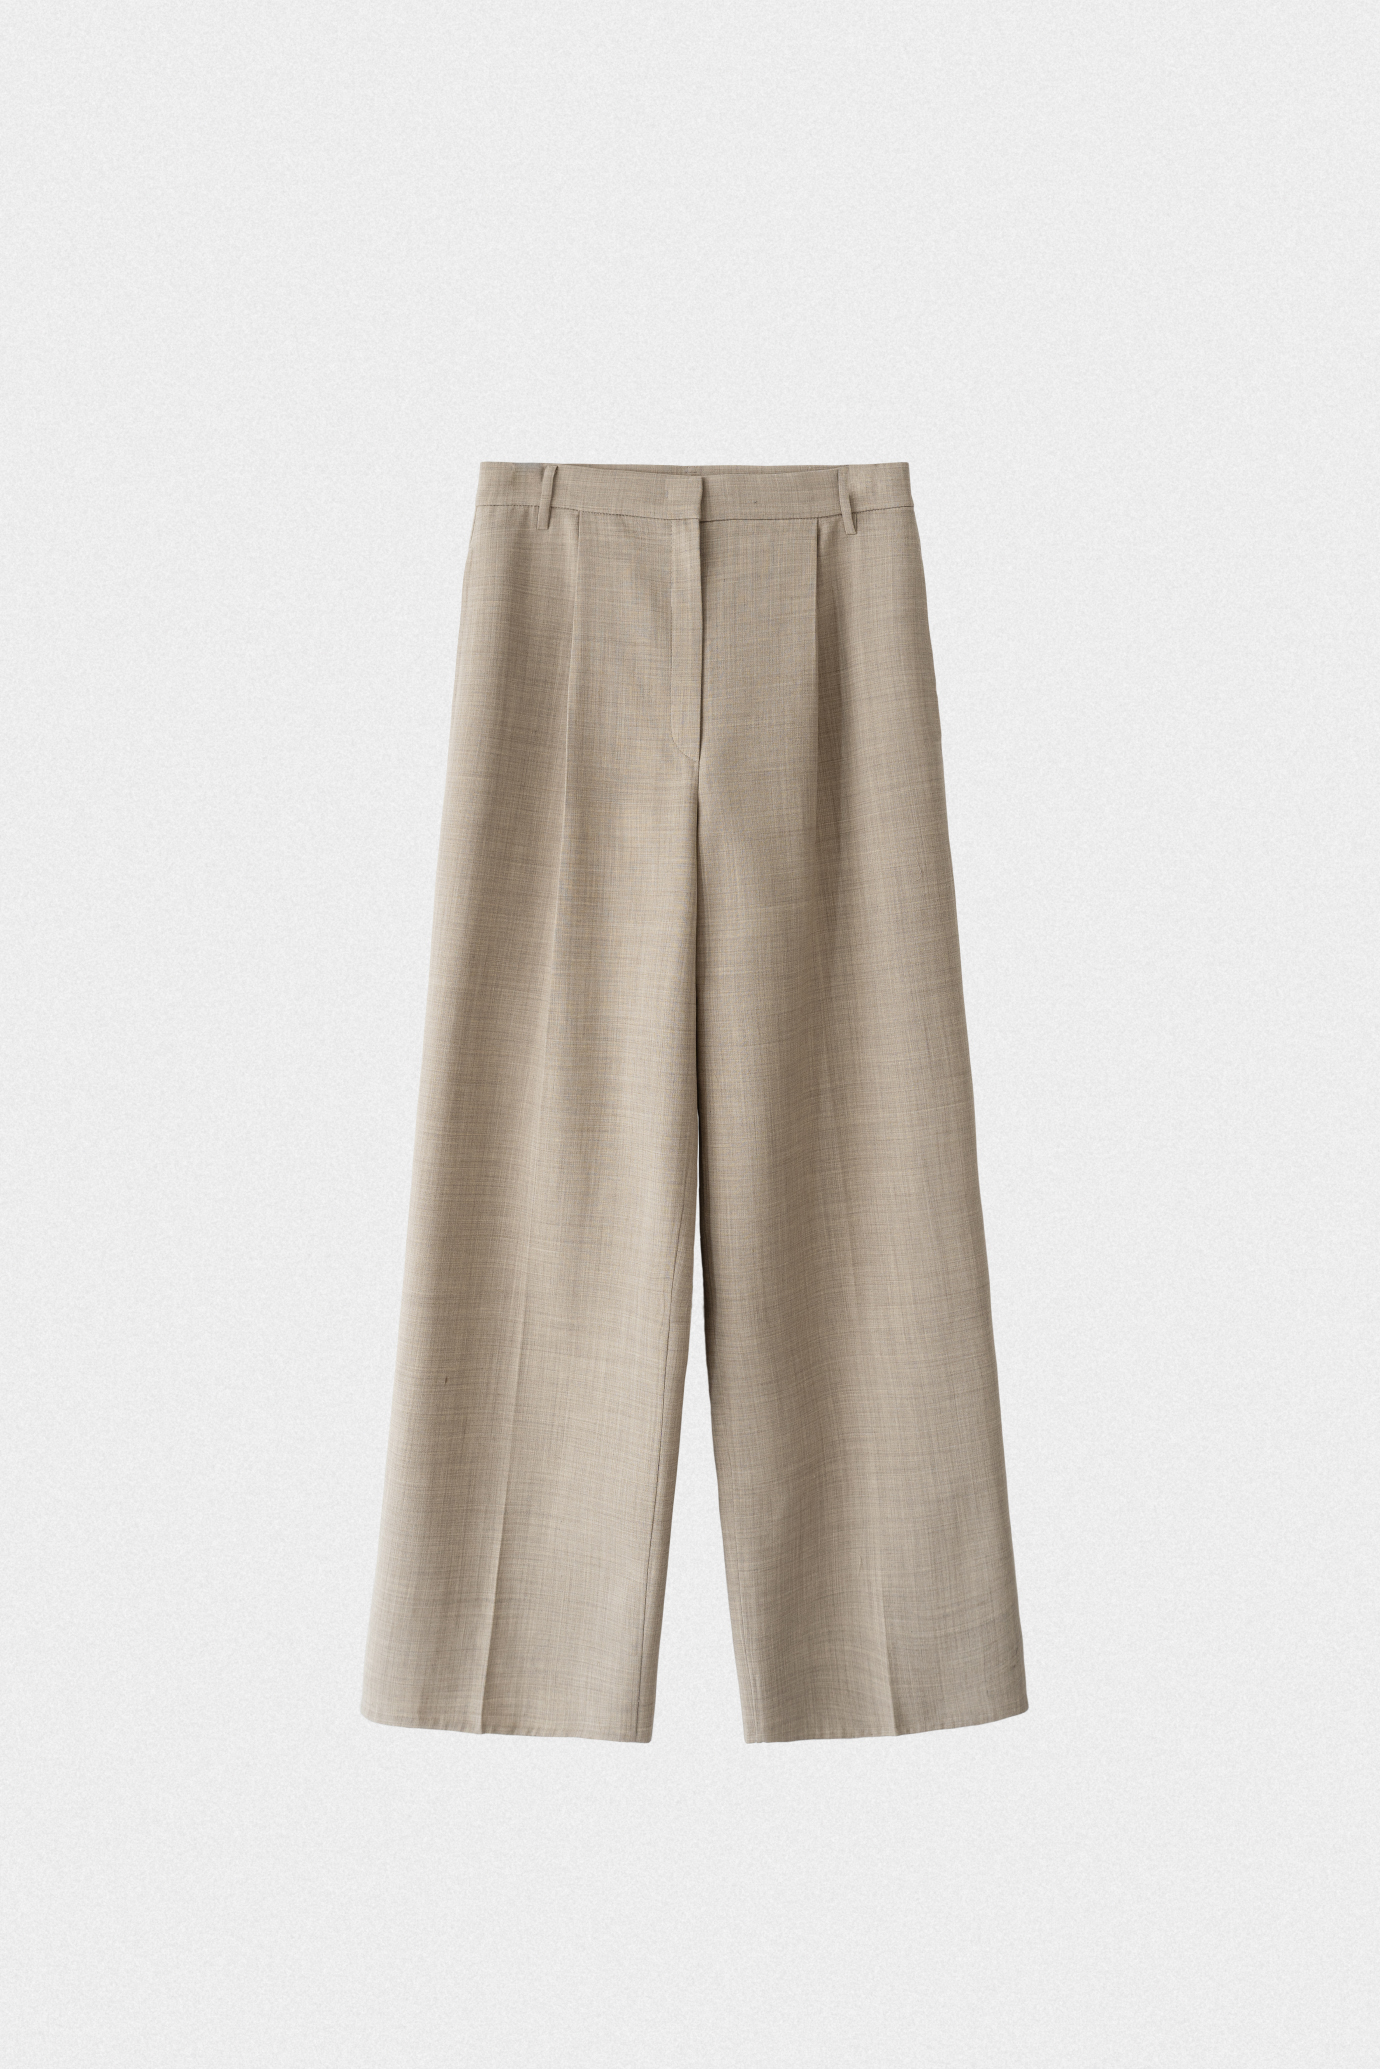 19612_Worsted Yarn Trousers